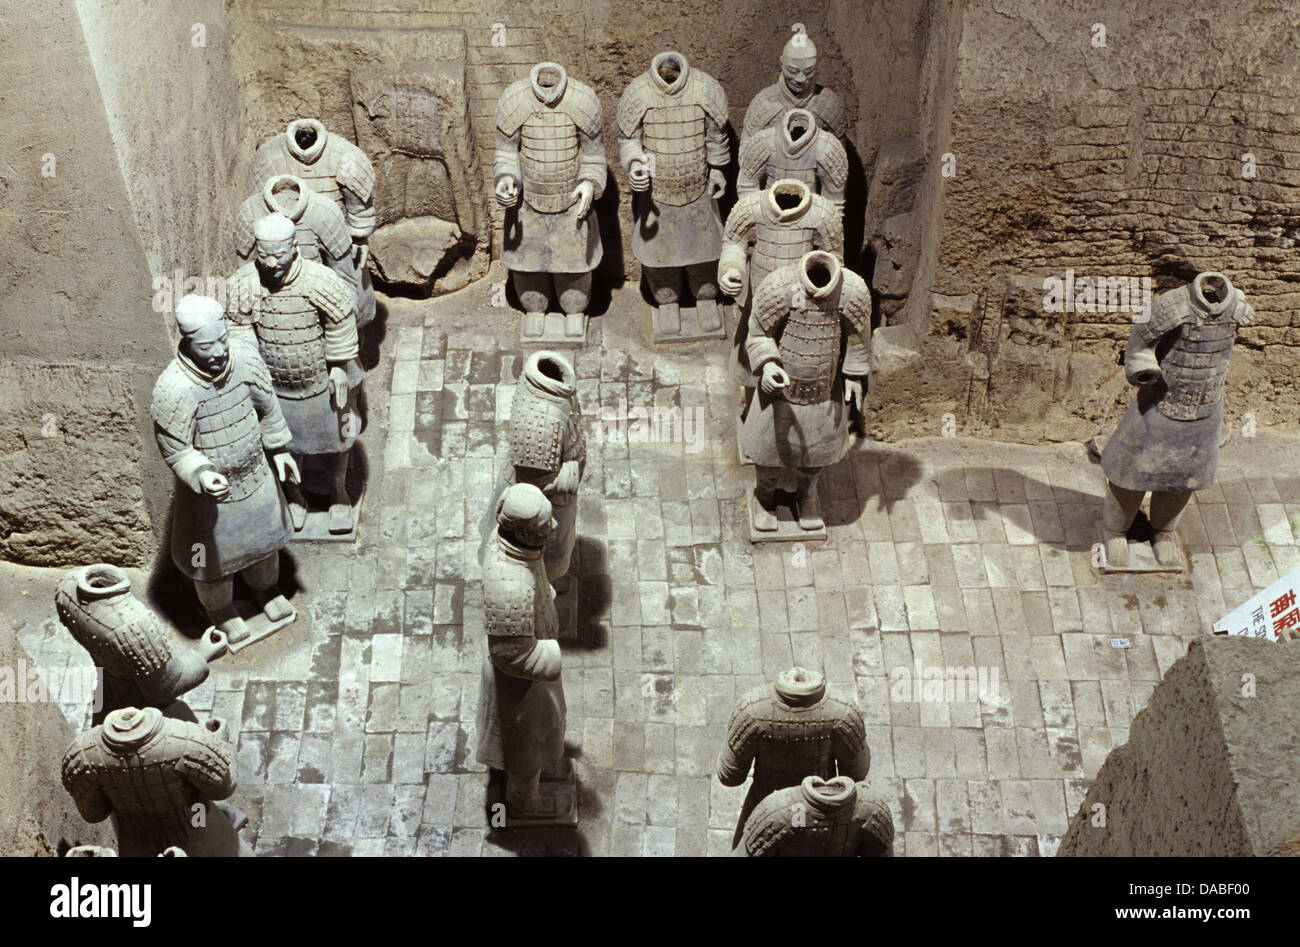 Headless infantrymen sculptures of the Terracotta Army dating from approximately the late third century BCE depicting the armies of Qin Shi Huang, the first Emperor of China located in Lintong District in Xi'an, the capital city of Shaanxi province, China Stock Photo